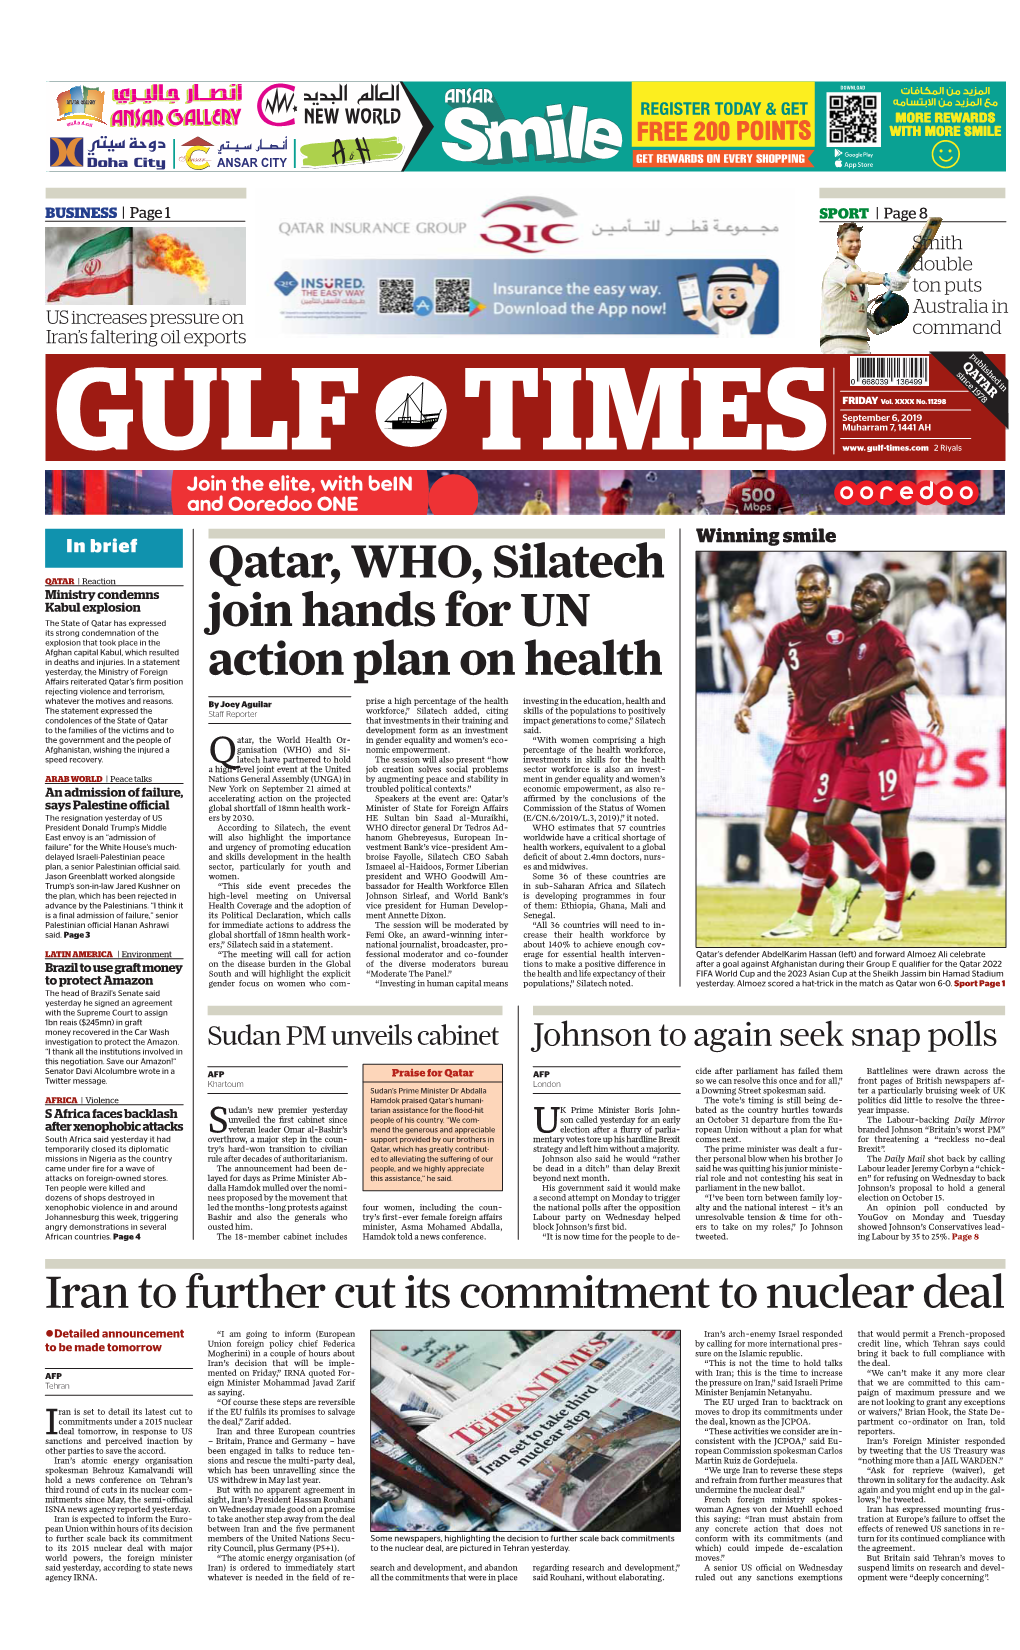 Qatar, WHO, Silatech Join Hands for UN Action Plan on Health